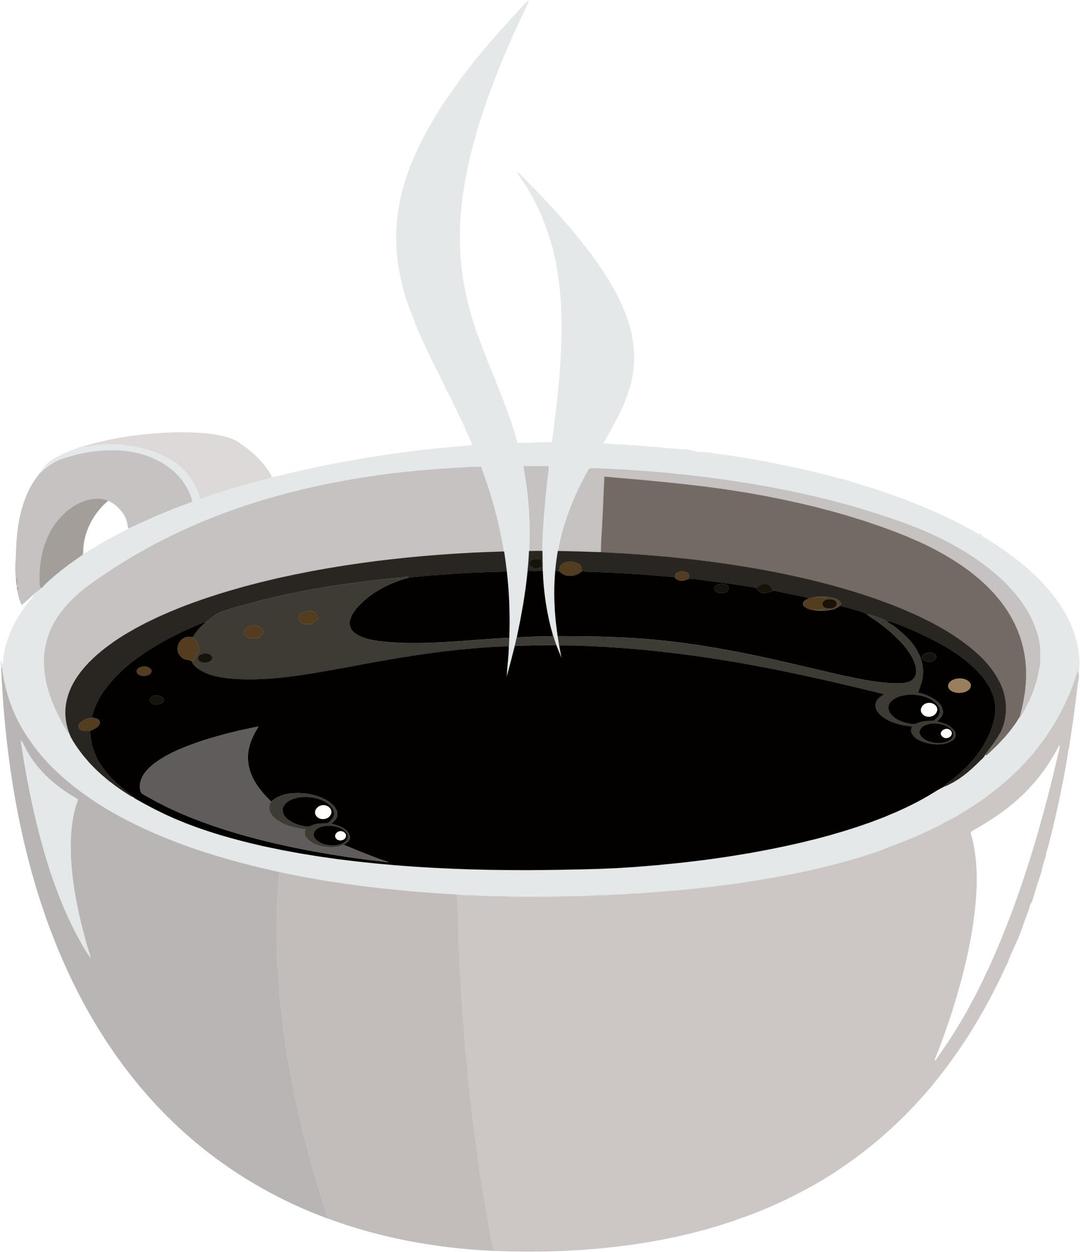 Hot Cup Of Coffee png transparent